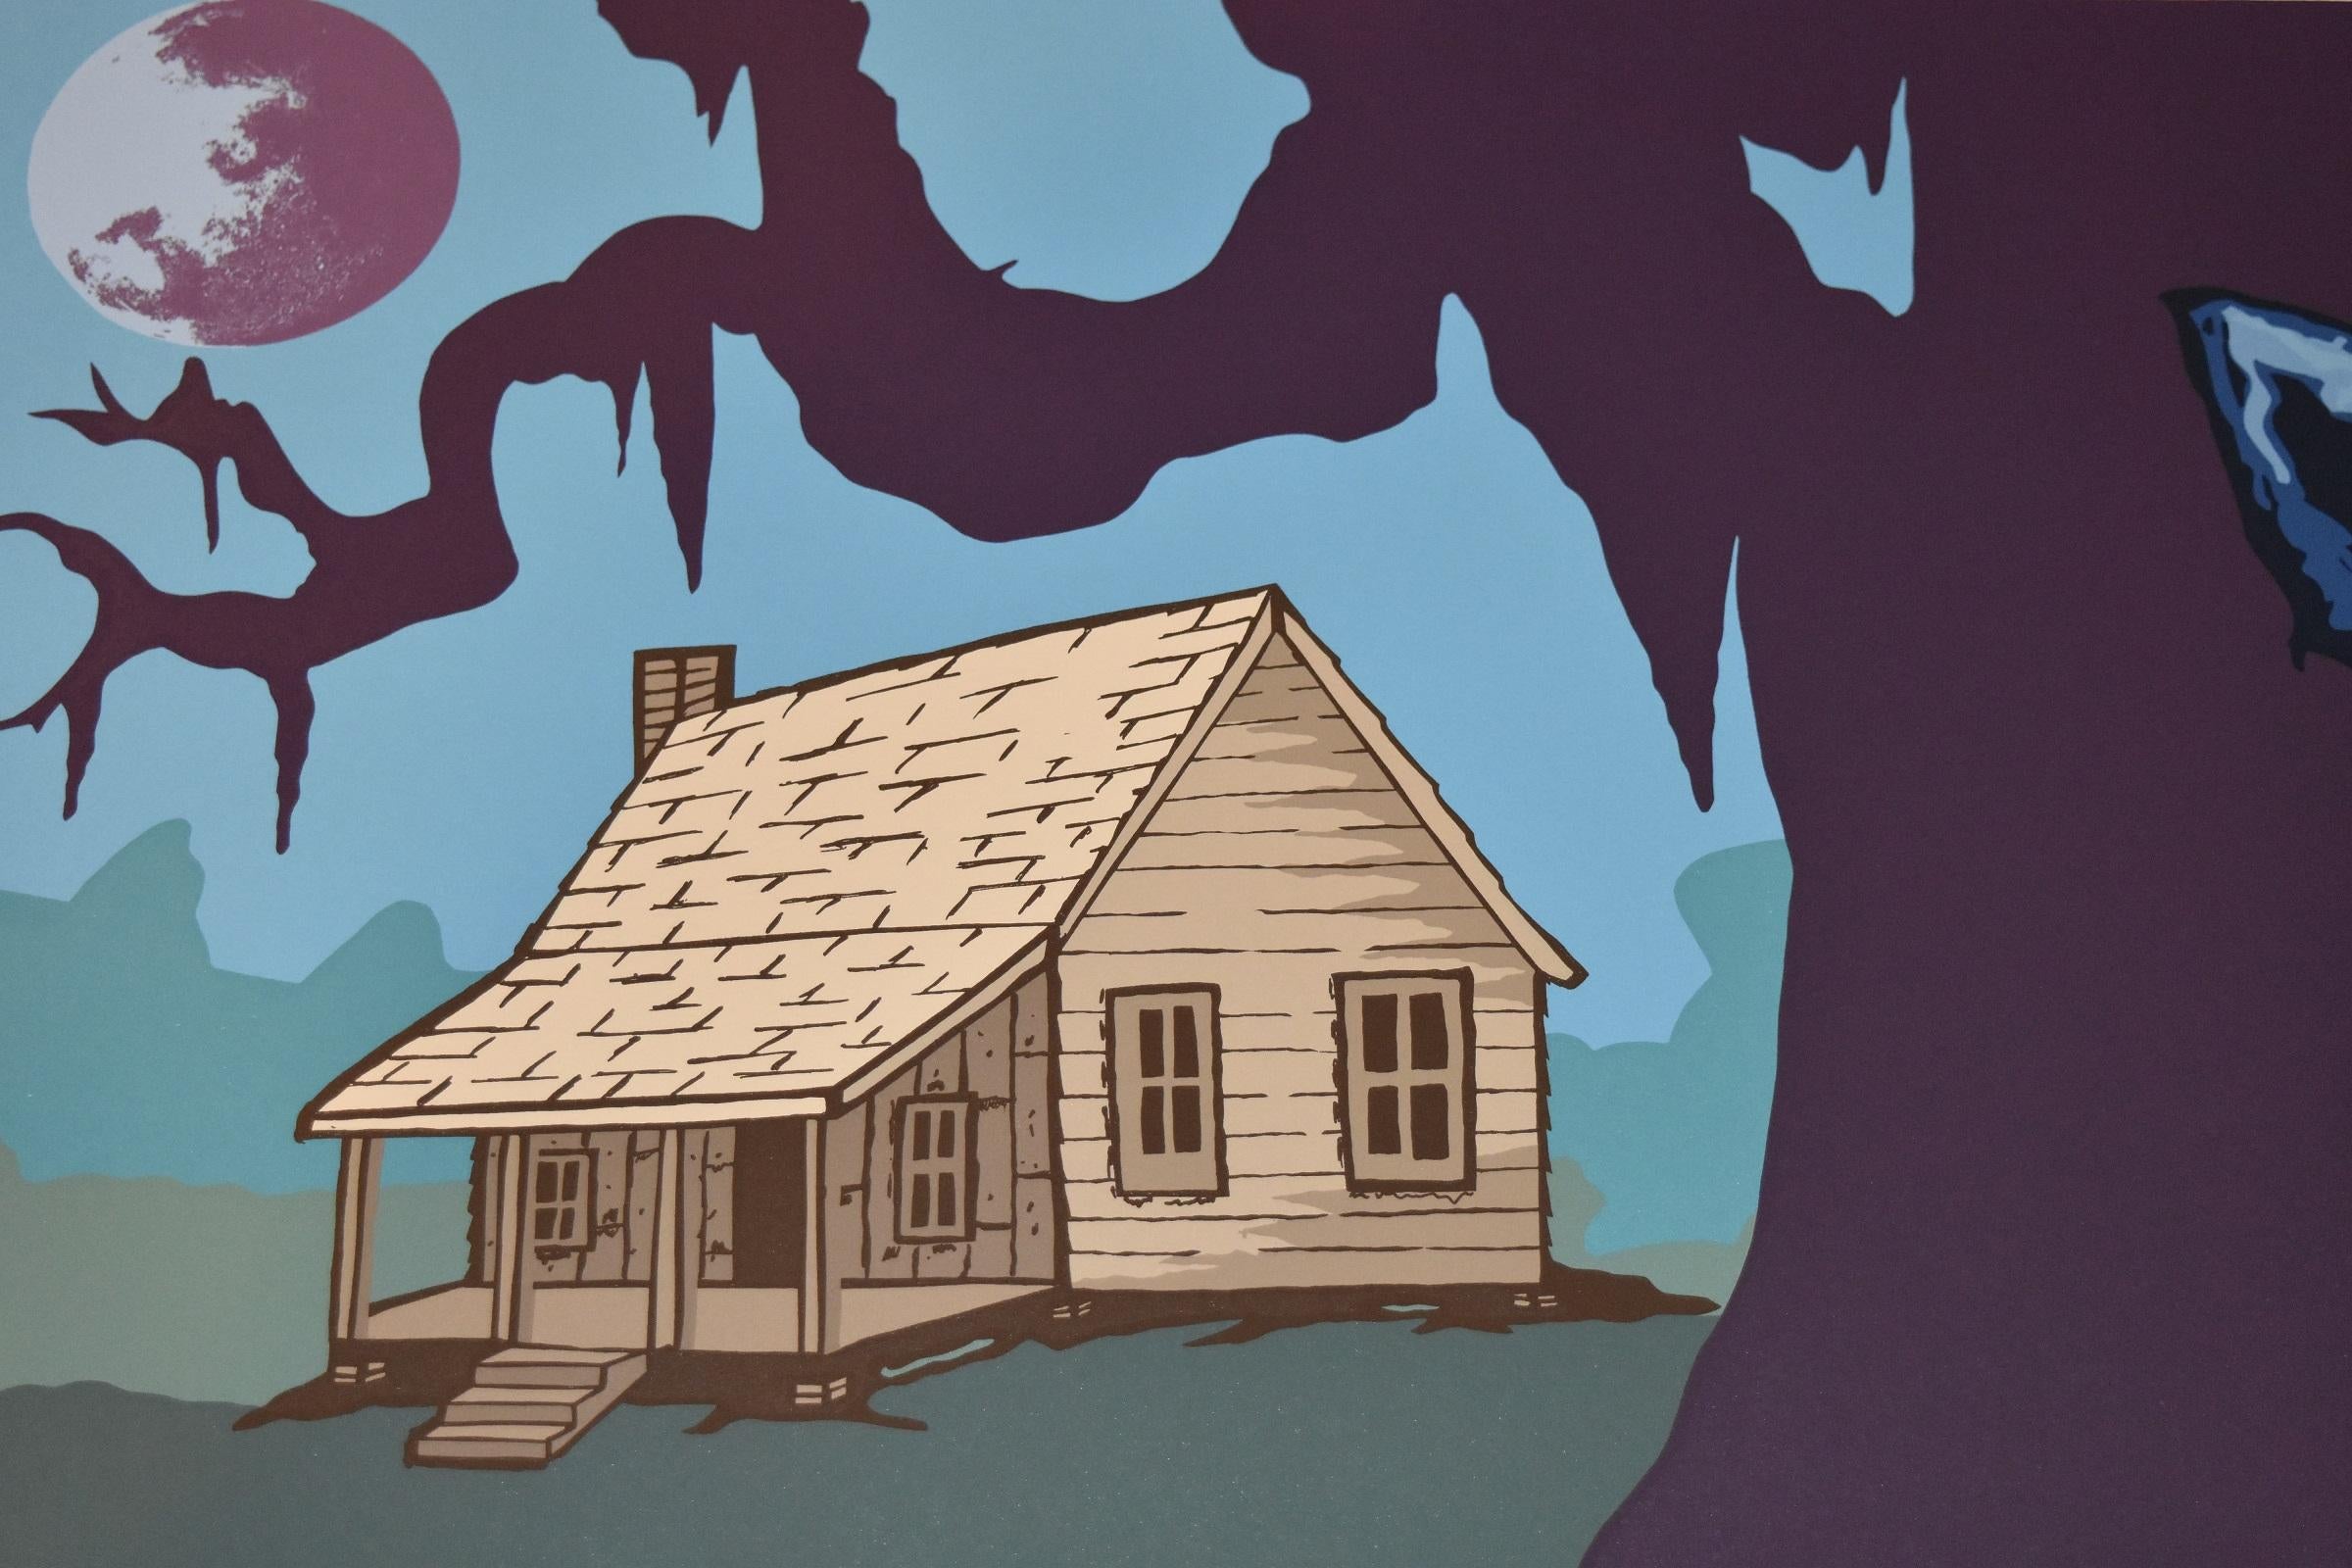 This Blue Dog work consists of a dog, a house, a tree and a moon. All are featured on a background of shades of blue, gray, green and black.  The house appears to be a little tan shack, the tree is purple with a black shadow and the moon is purple